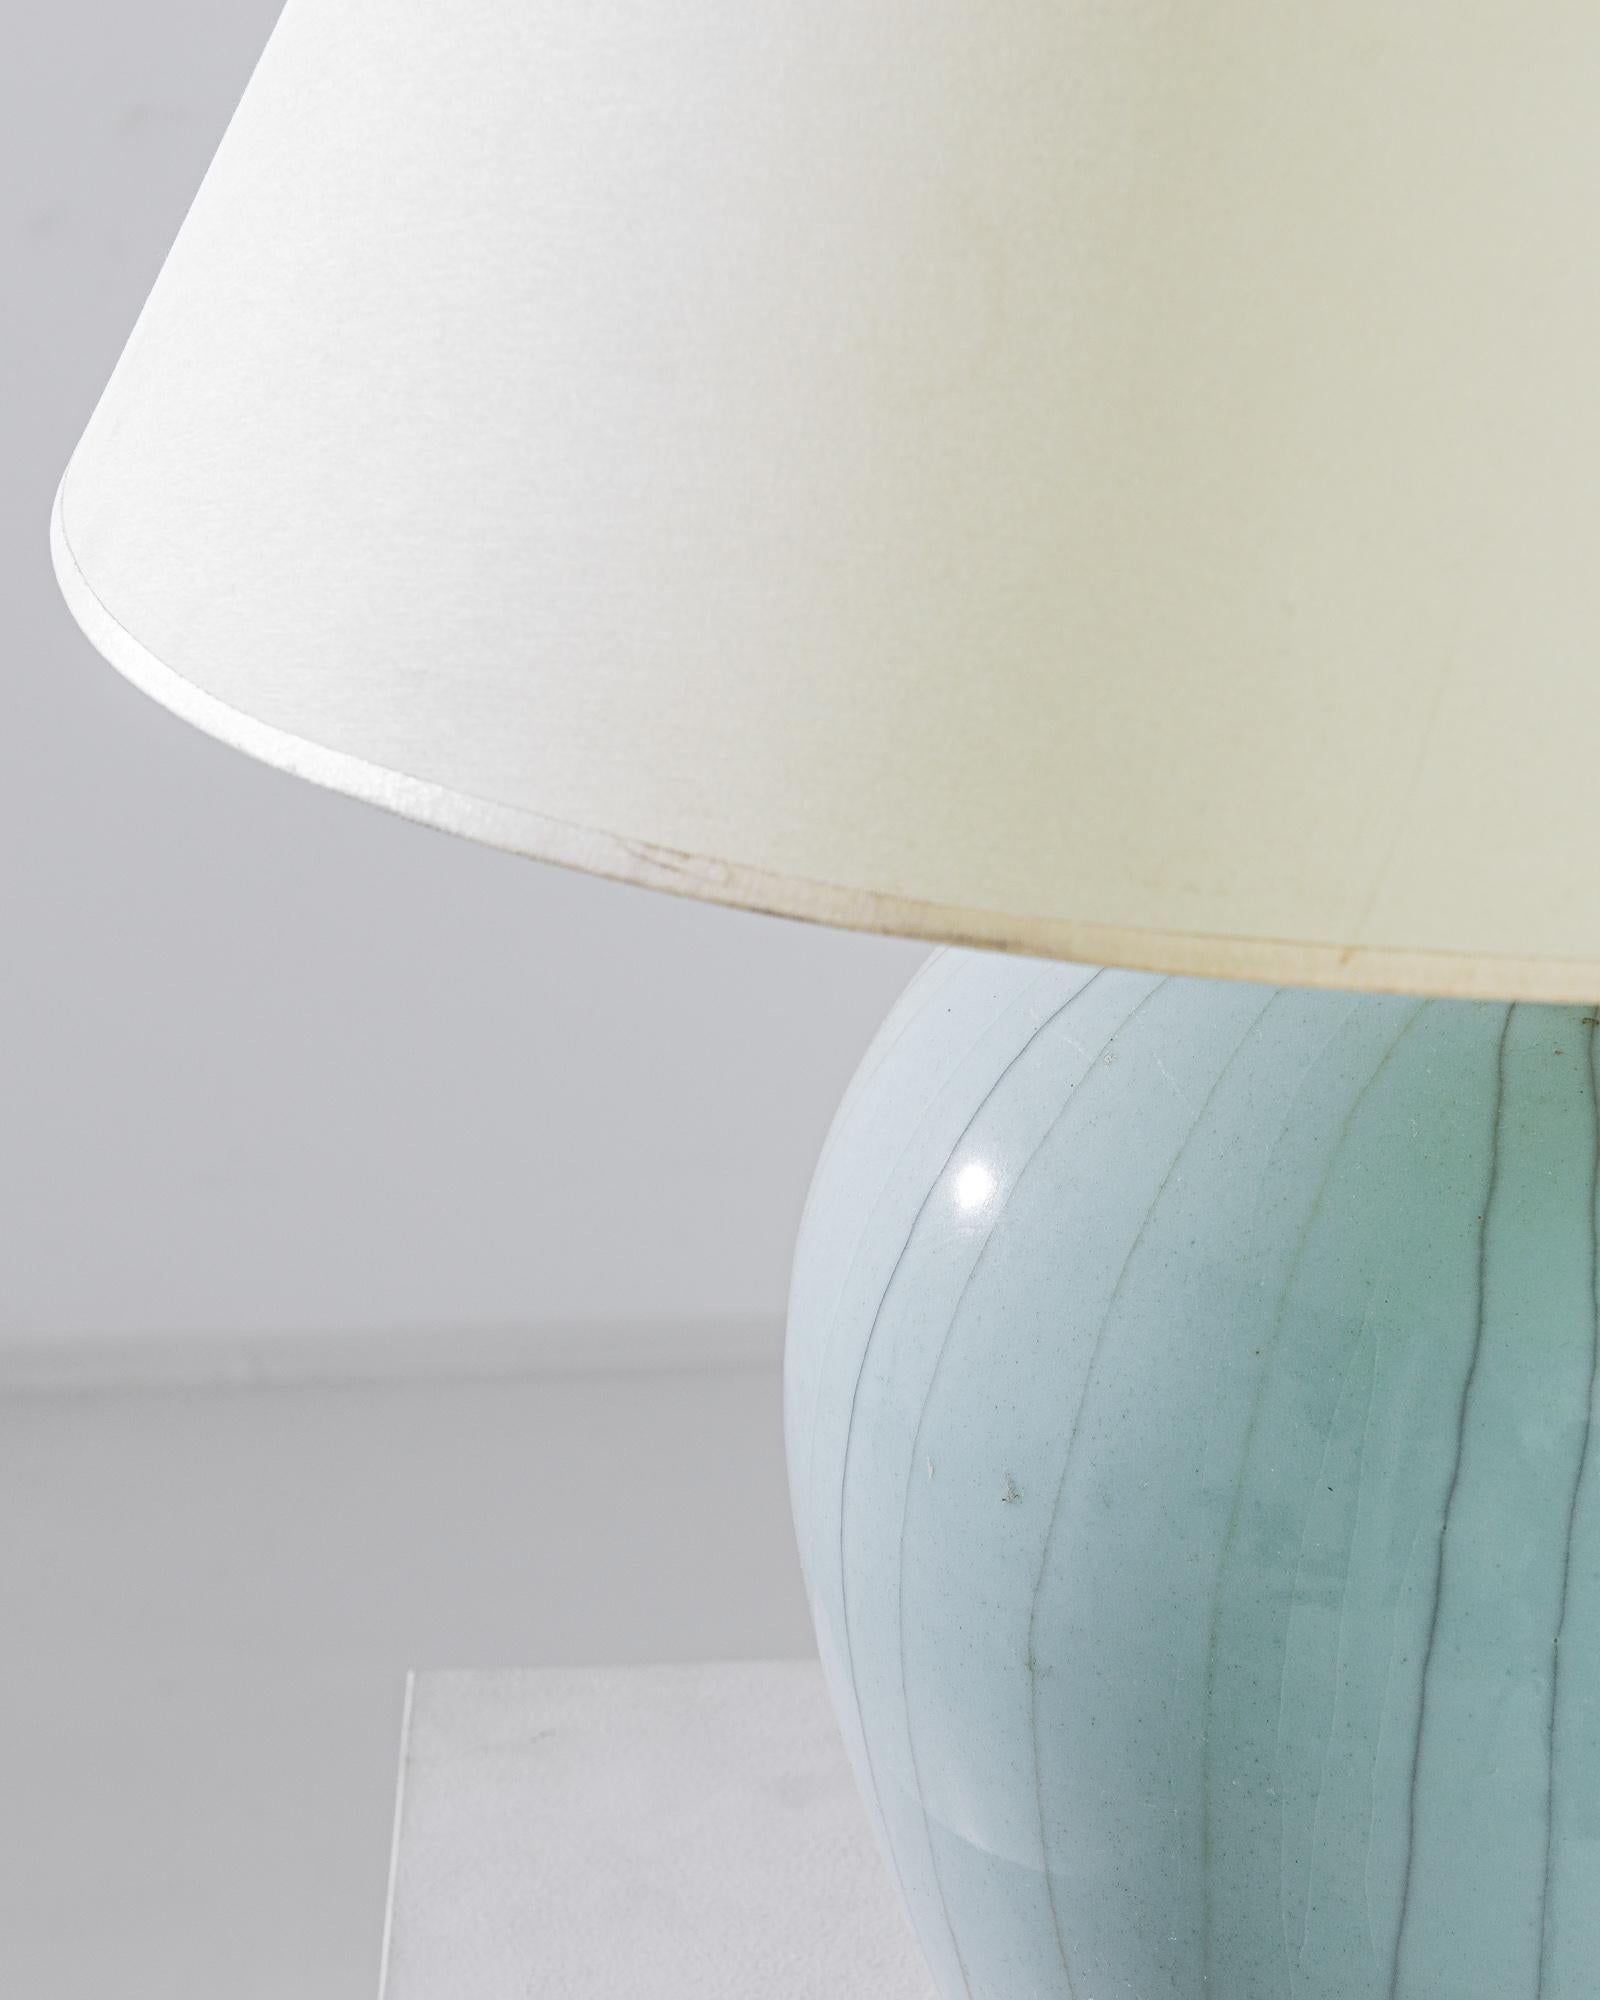 An exceptional find to inspire your collection. This vintage Chinese storage pot has been adapted into a beautiful table lamp. Polished brass meets a beautiful celadon crackle glaze, enlightening your space with an uncompromising contrast. The